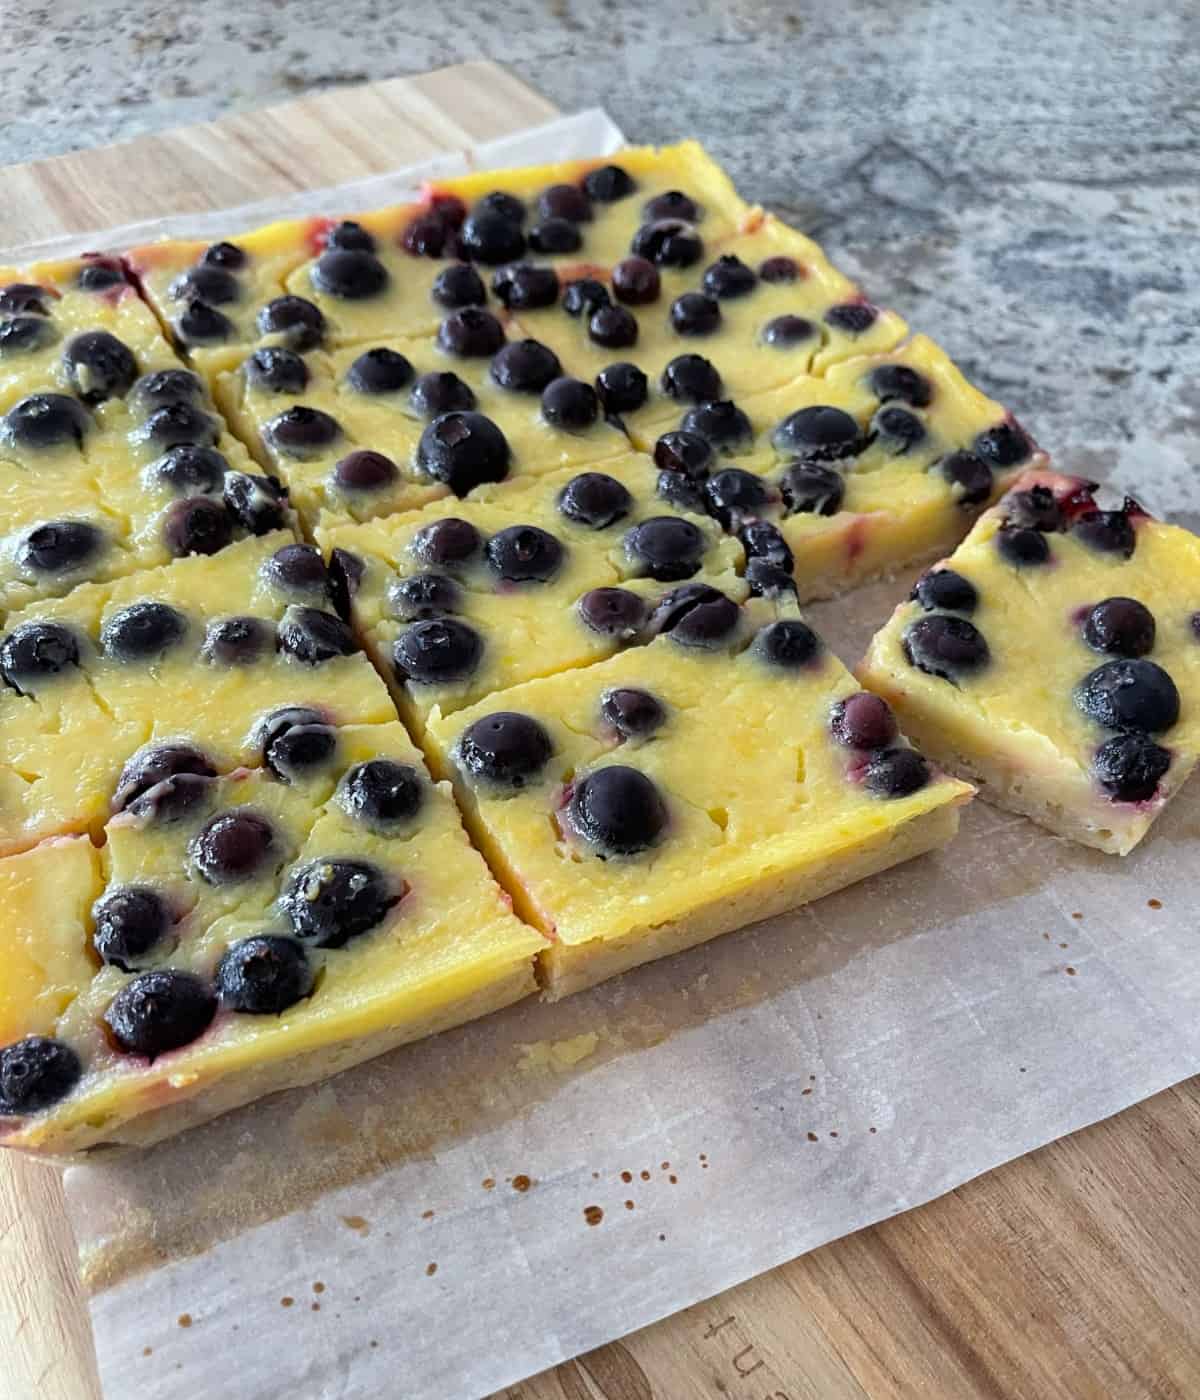 Lemon blueberry bars cut into 12 pieces on wood cutting board.